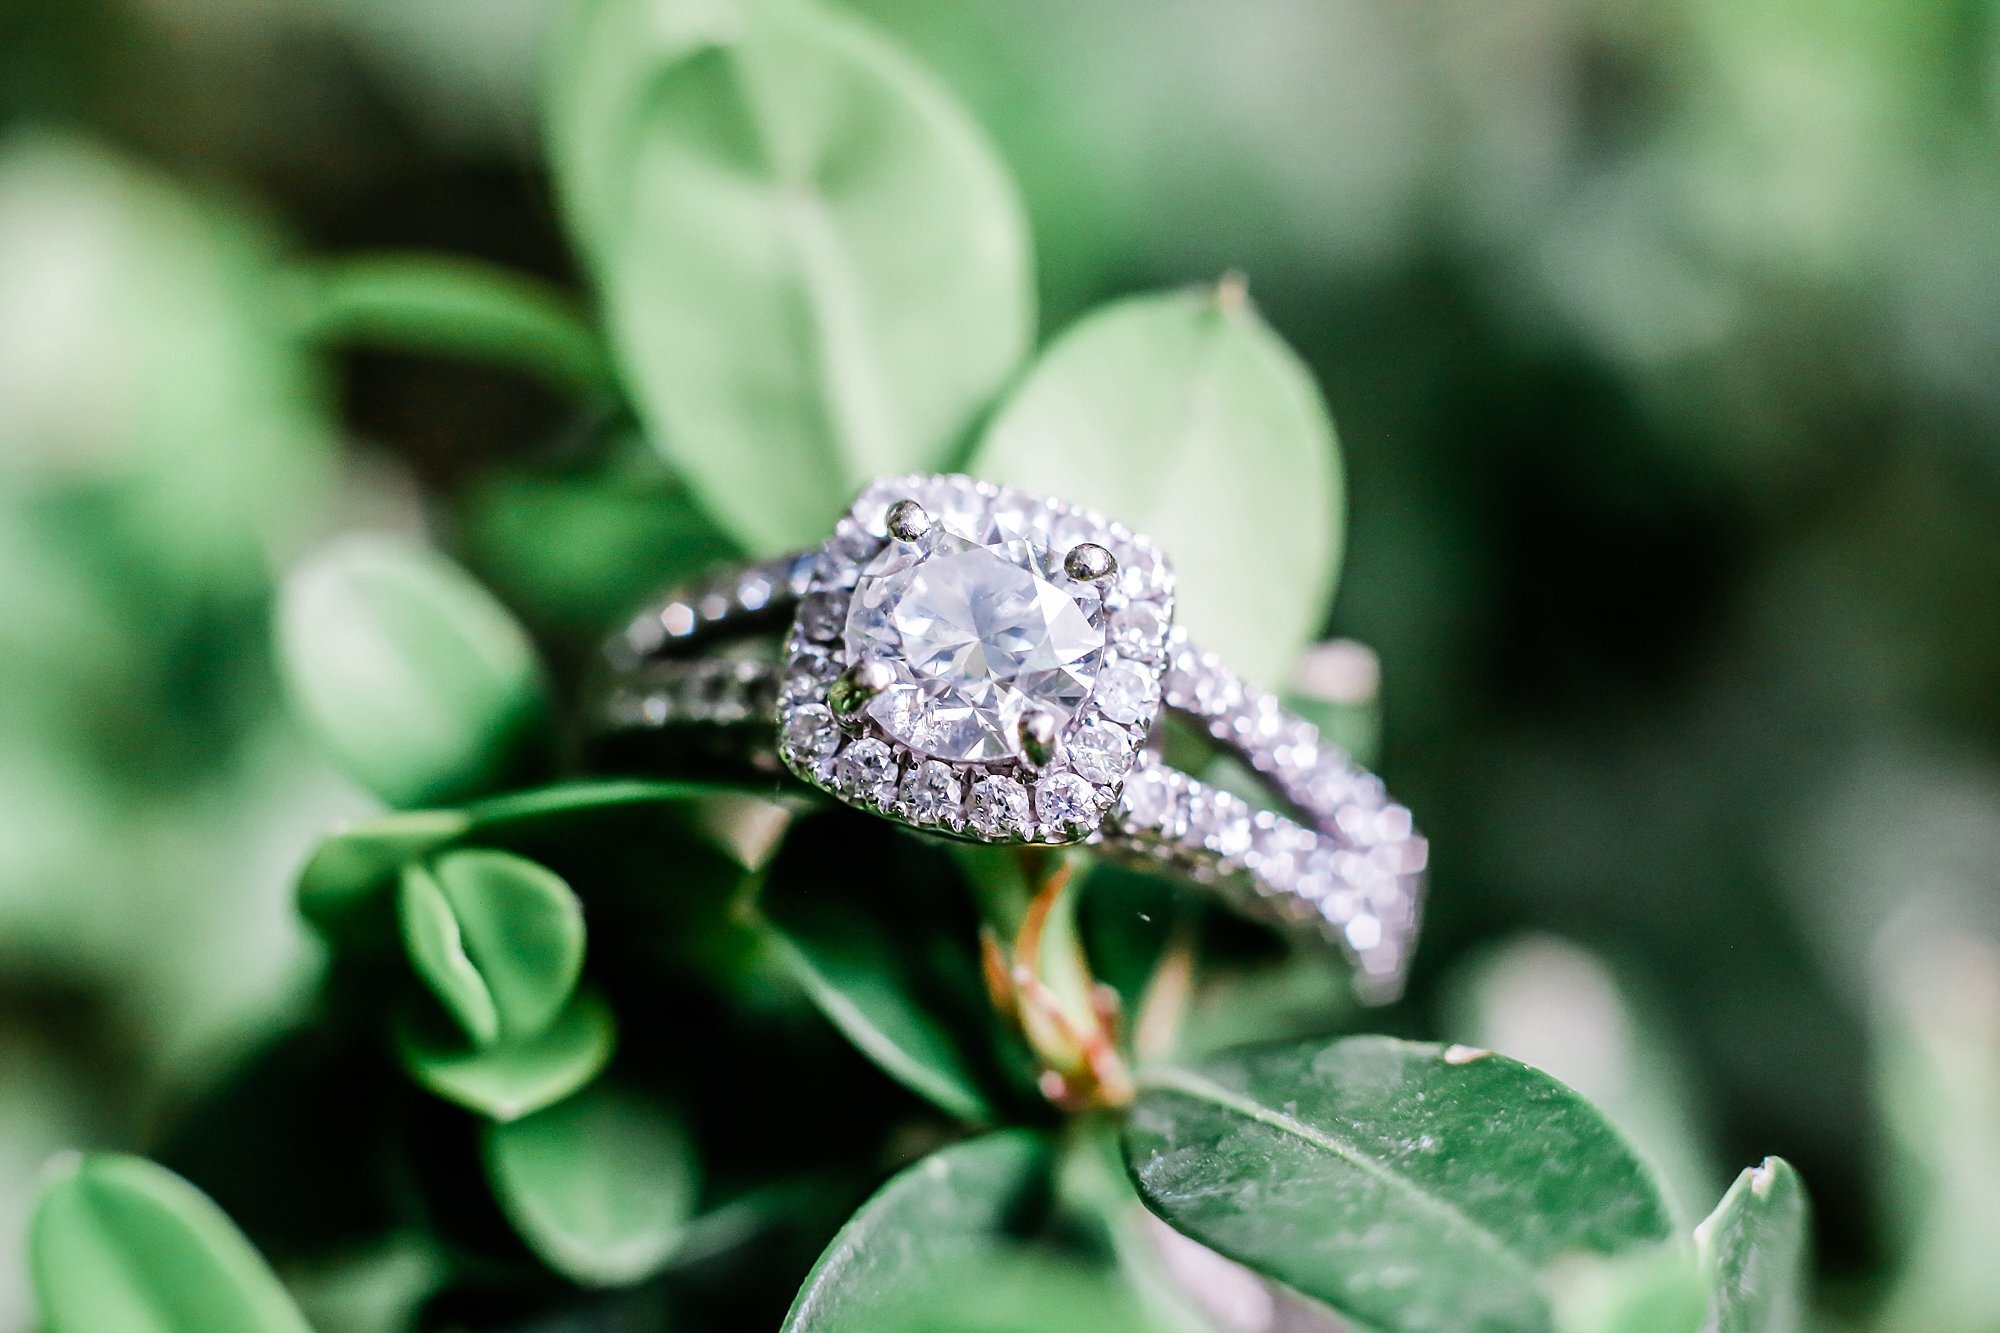  engagement ring sitting on a plant leaf 